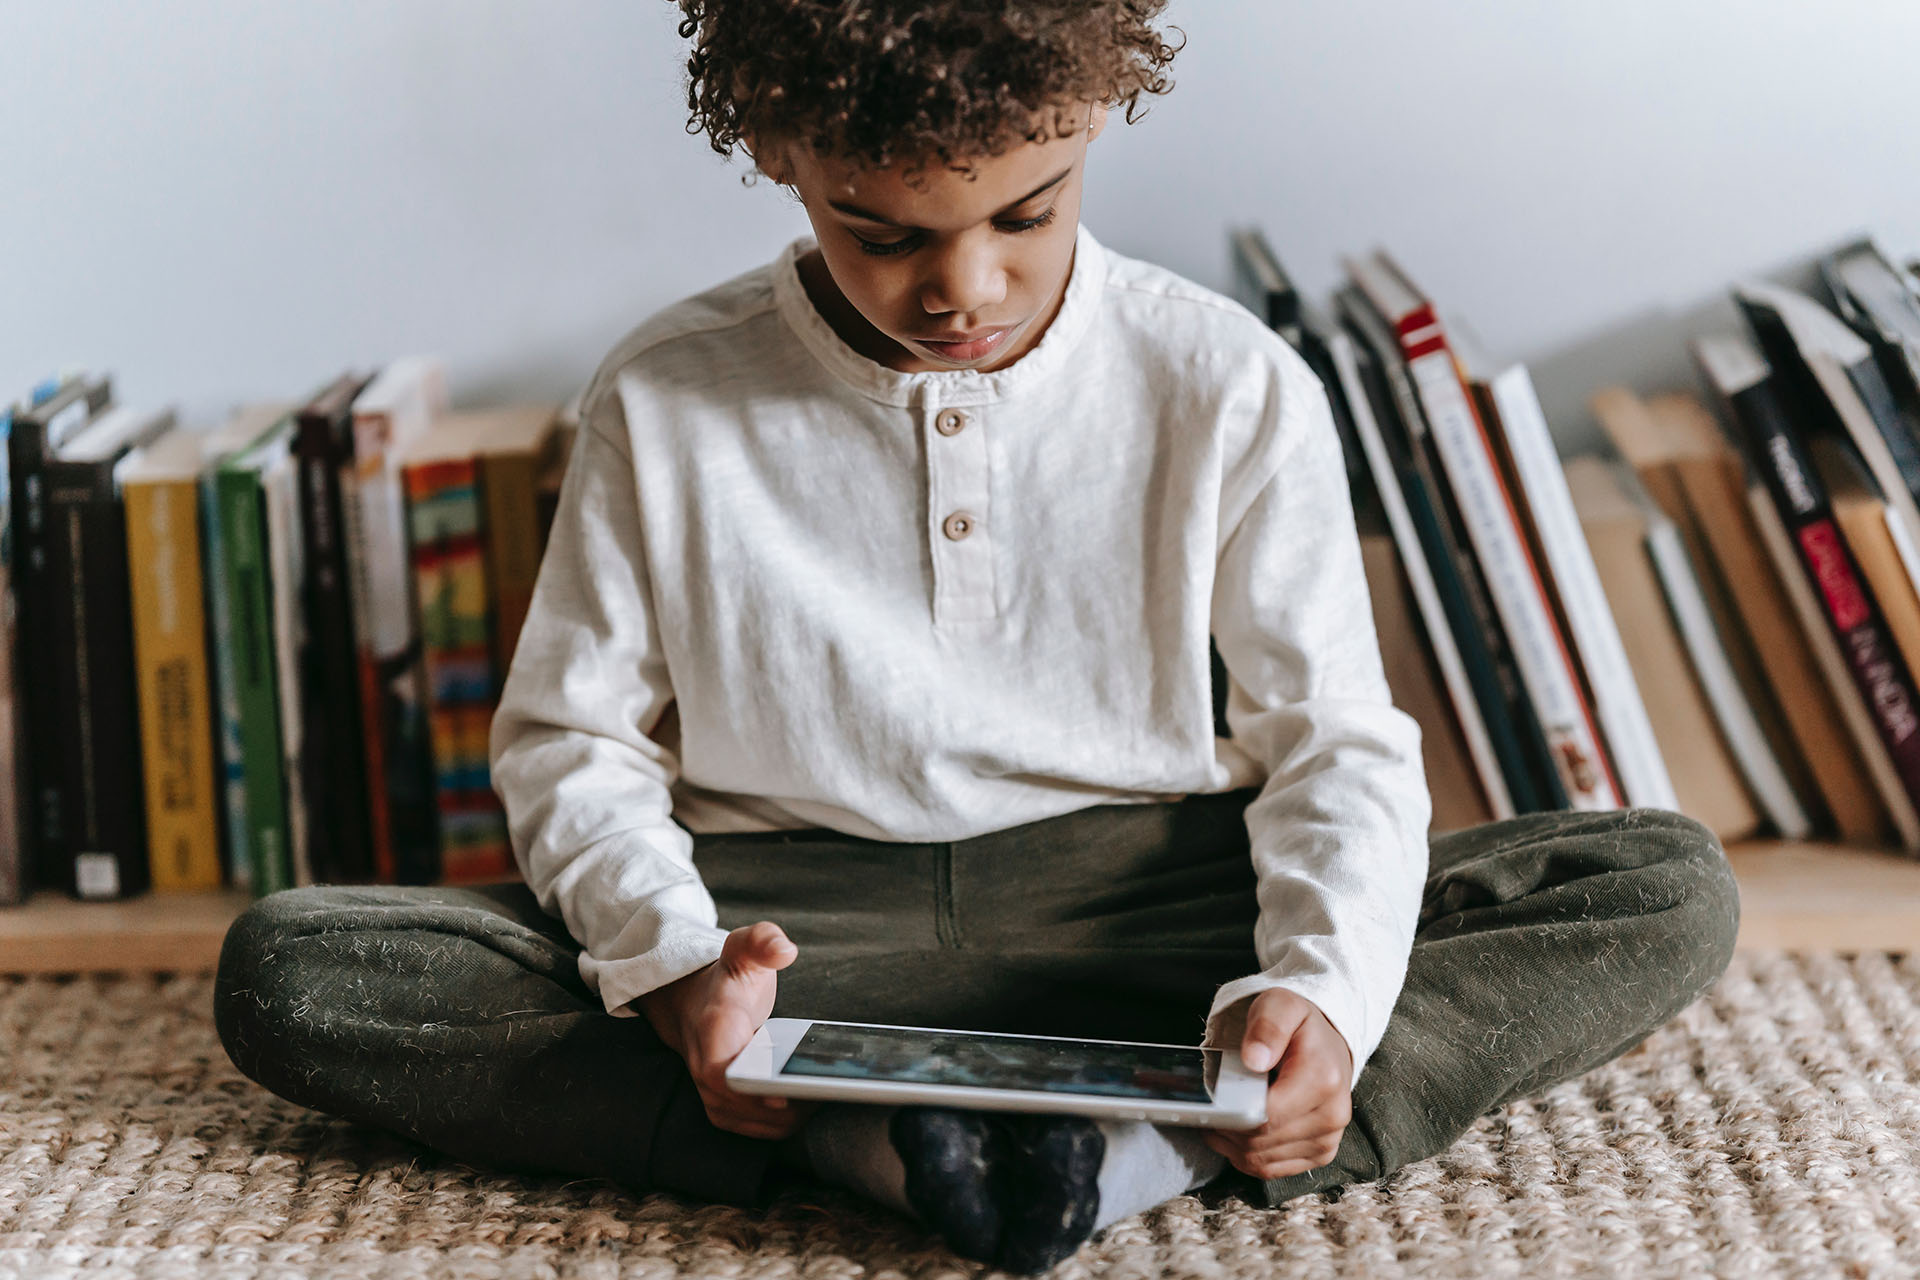 Picture of a boy using a tablet indoors.